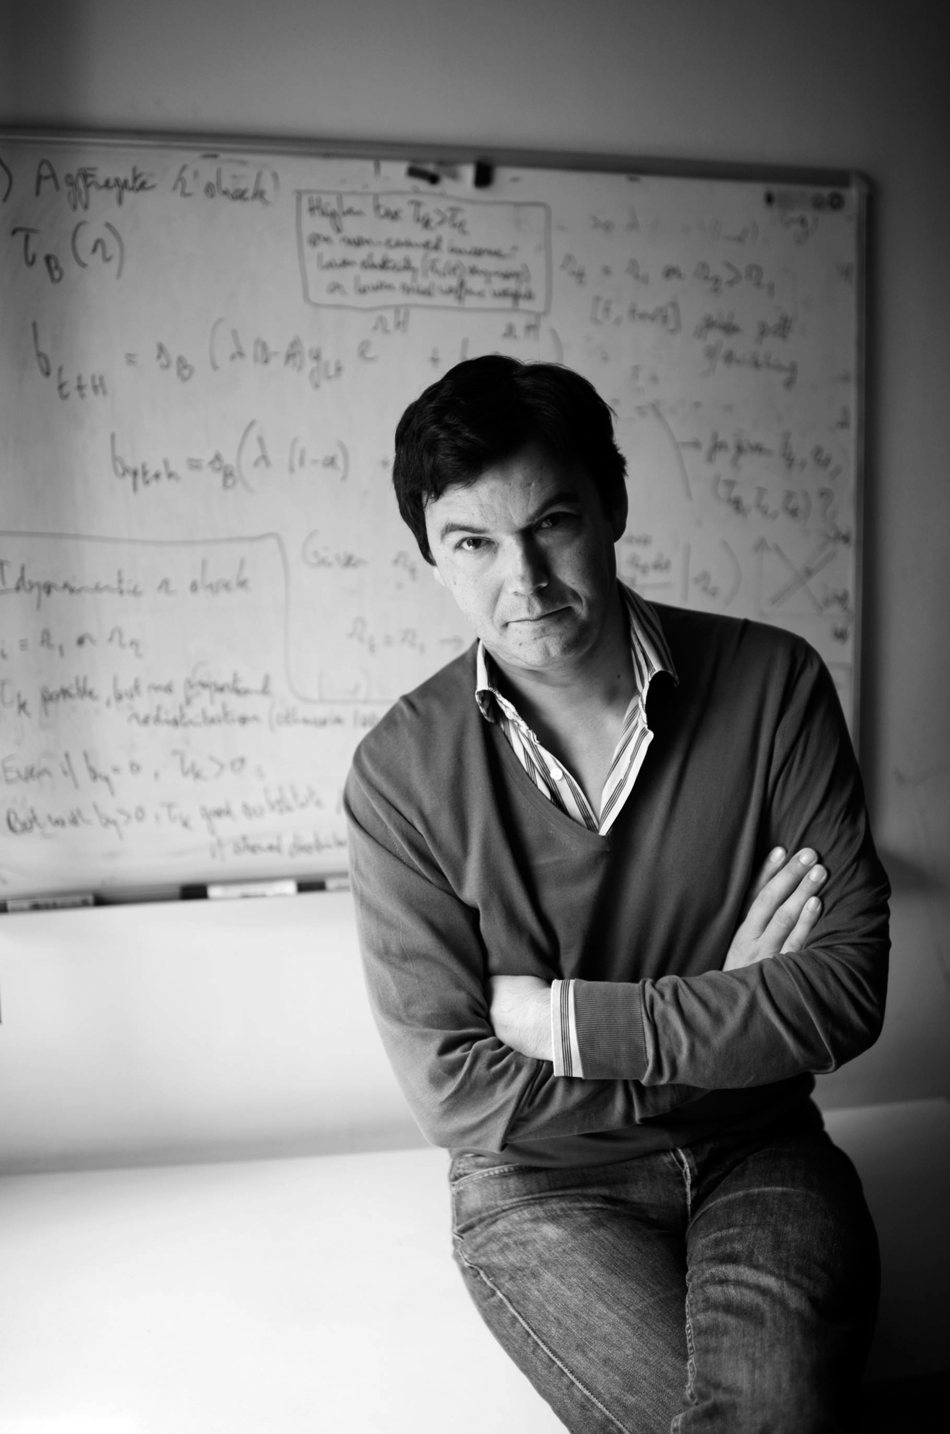 Thomas Piketty in his office at the Paris School of Economics, 2013